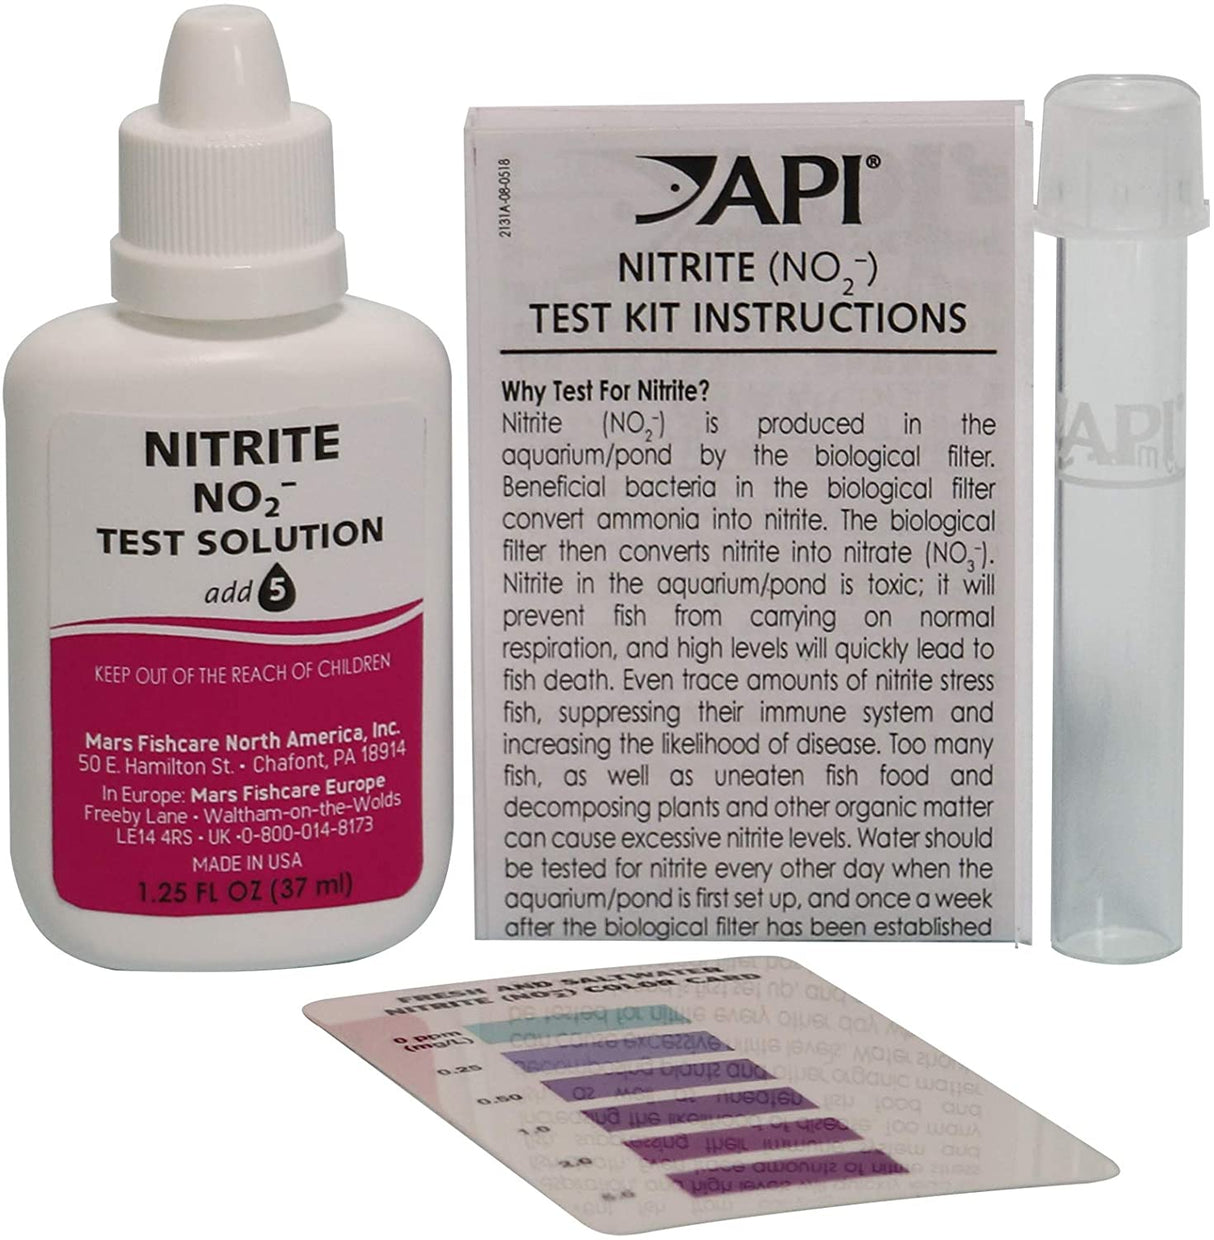 1 count API Nitrite NO2 Test Kit Helps Prevent Fish Loss in Freshwater and Saltwater Aquariums